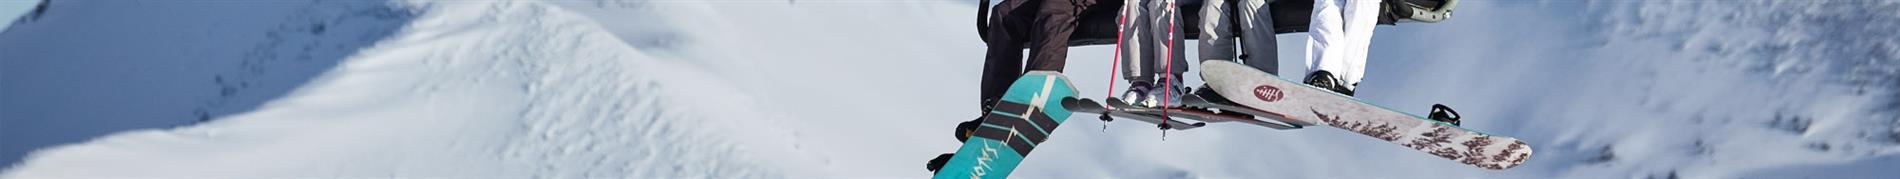 DC Shoes Women's skis, snowboards, and accessories for everything snow. 